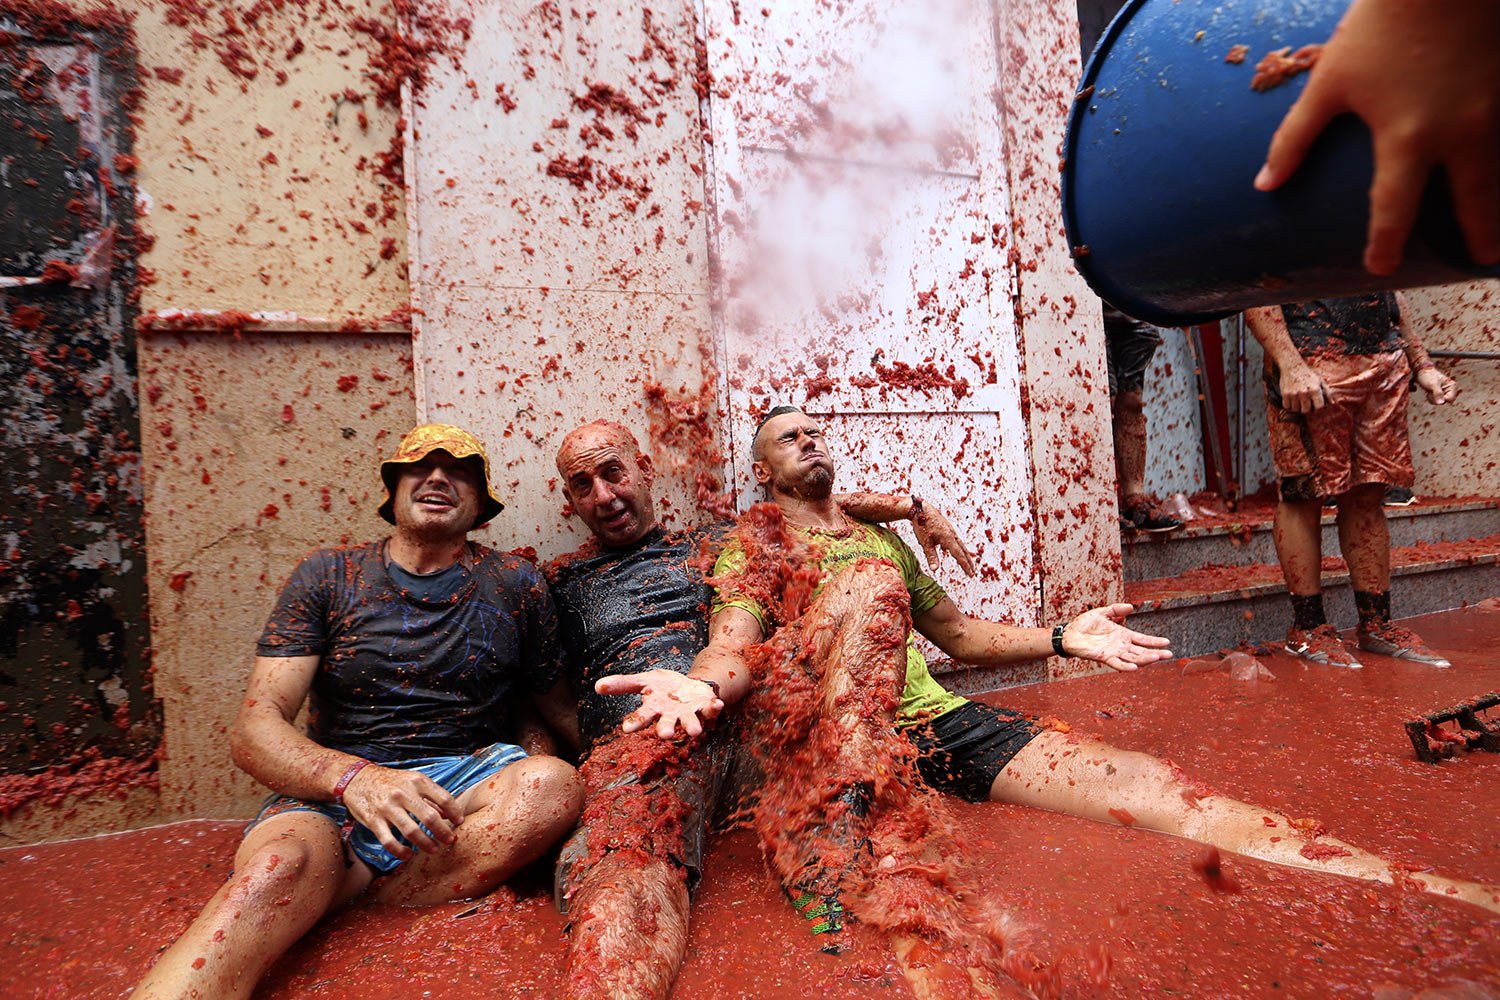  People covered with bits of tomato sit in a pool of red pulp during the annual “Tomatina” street fight, in Bunol, Spain, Wednesday, Aug. 30, 2023. (AP Photo/Alberto Saiz) 